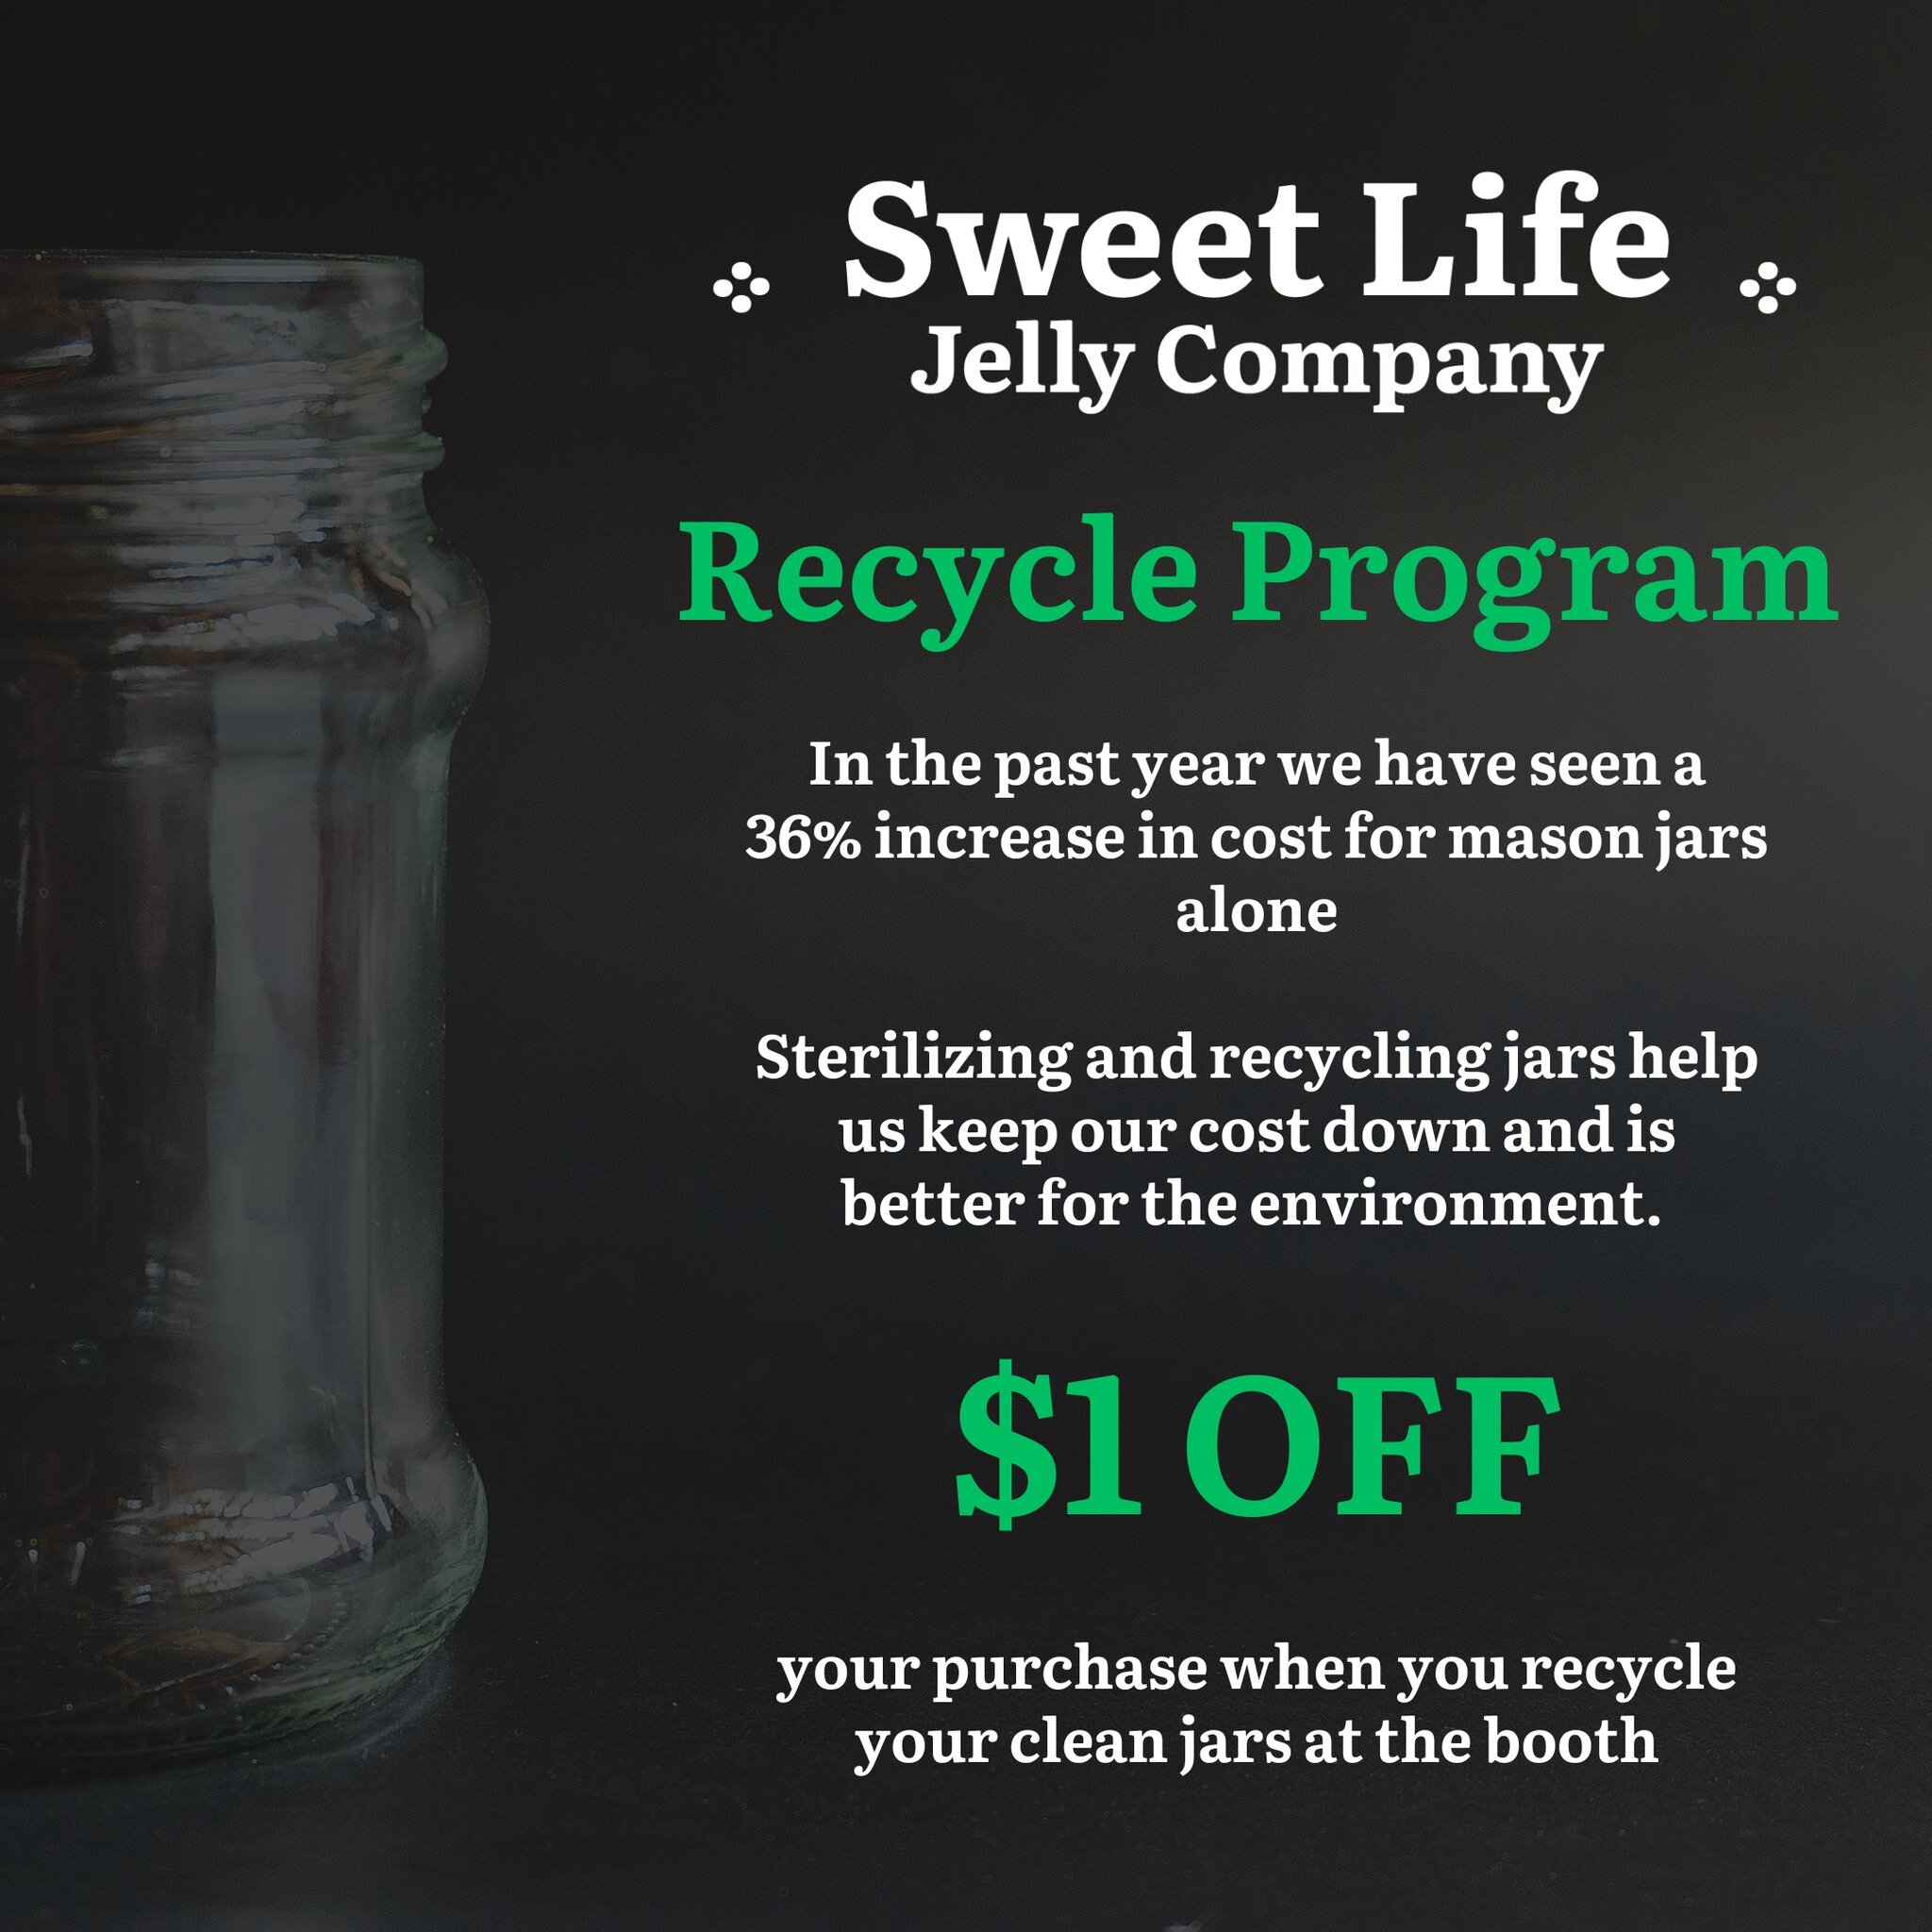 ♻️🌿♻️ RECYCLE PROGRAM ♻️🌿

Do you have a collection of empty Sweet Life Jelly Company jars cluttering up your pantry? 🍯 Don't toss them out! 

🌟 Introducing our Recycle Promotion: Trade in your CLEANED empty jelly jars and receive $1 OFF your pur